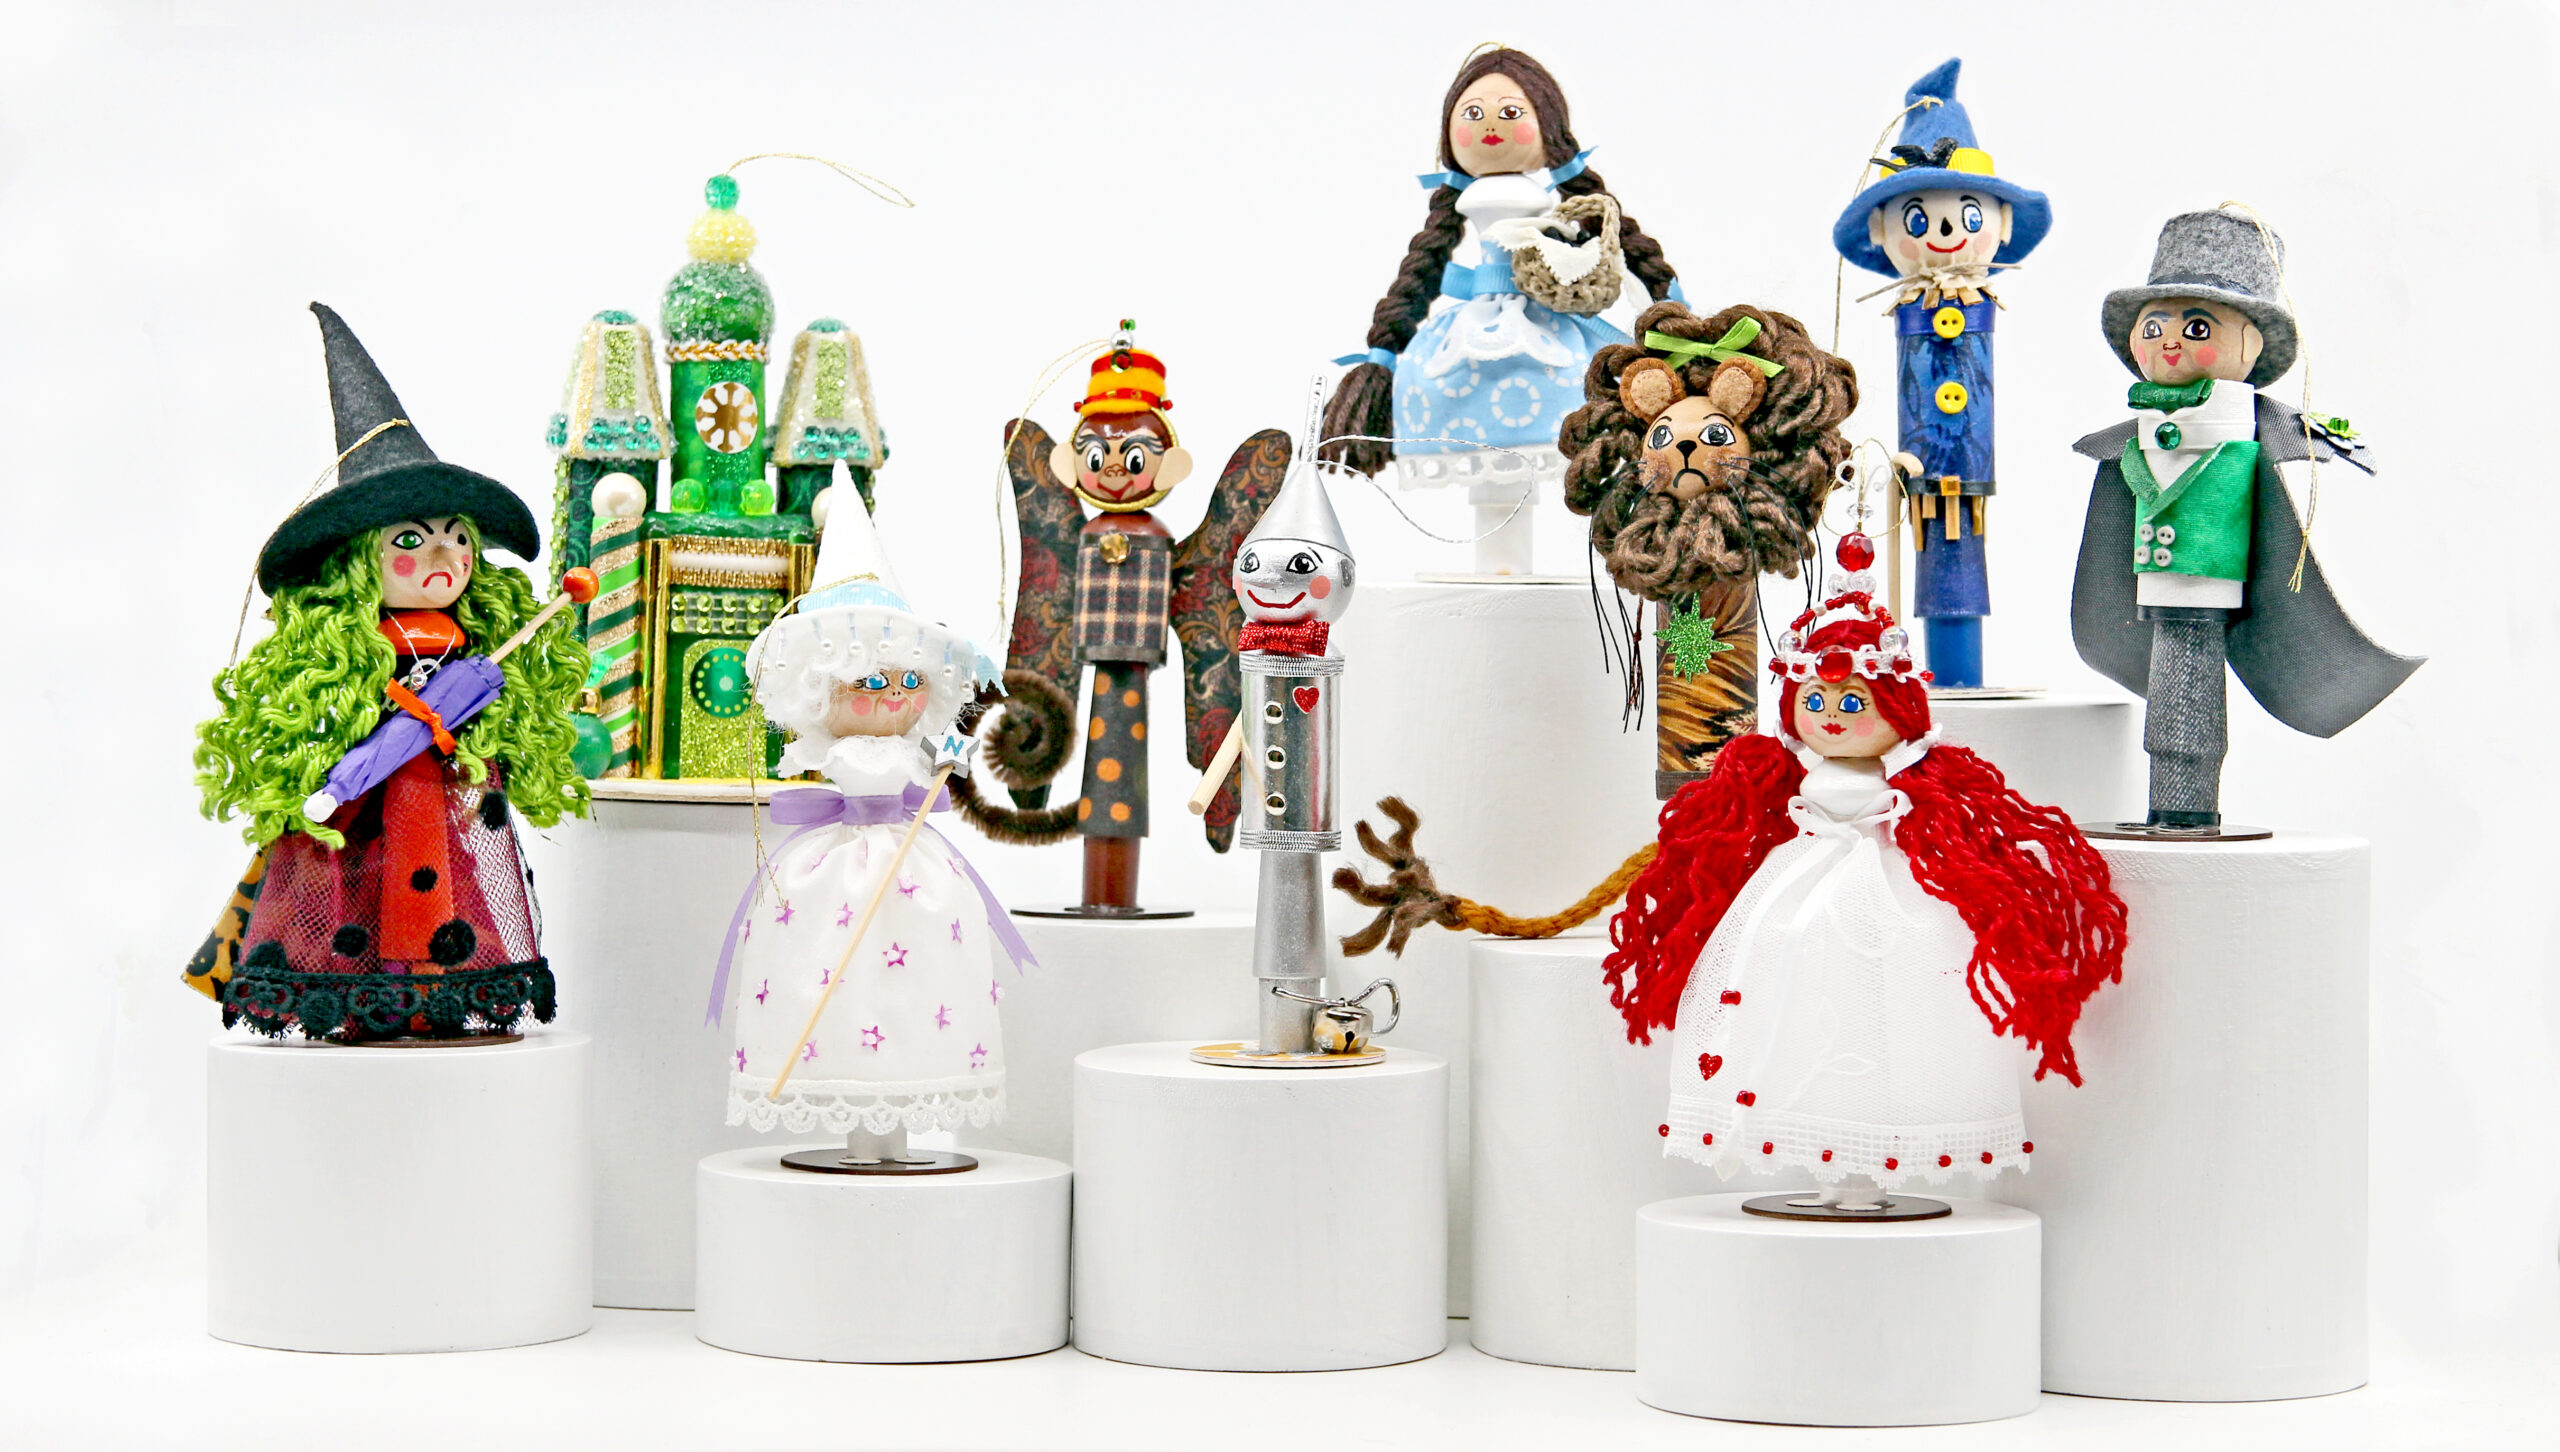 The Wizard of Oz Ornaments Collection